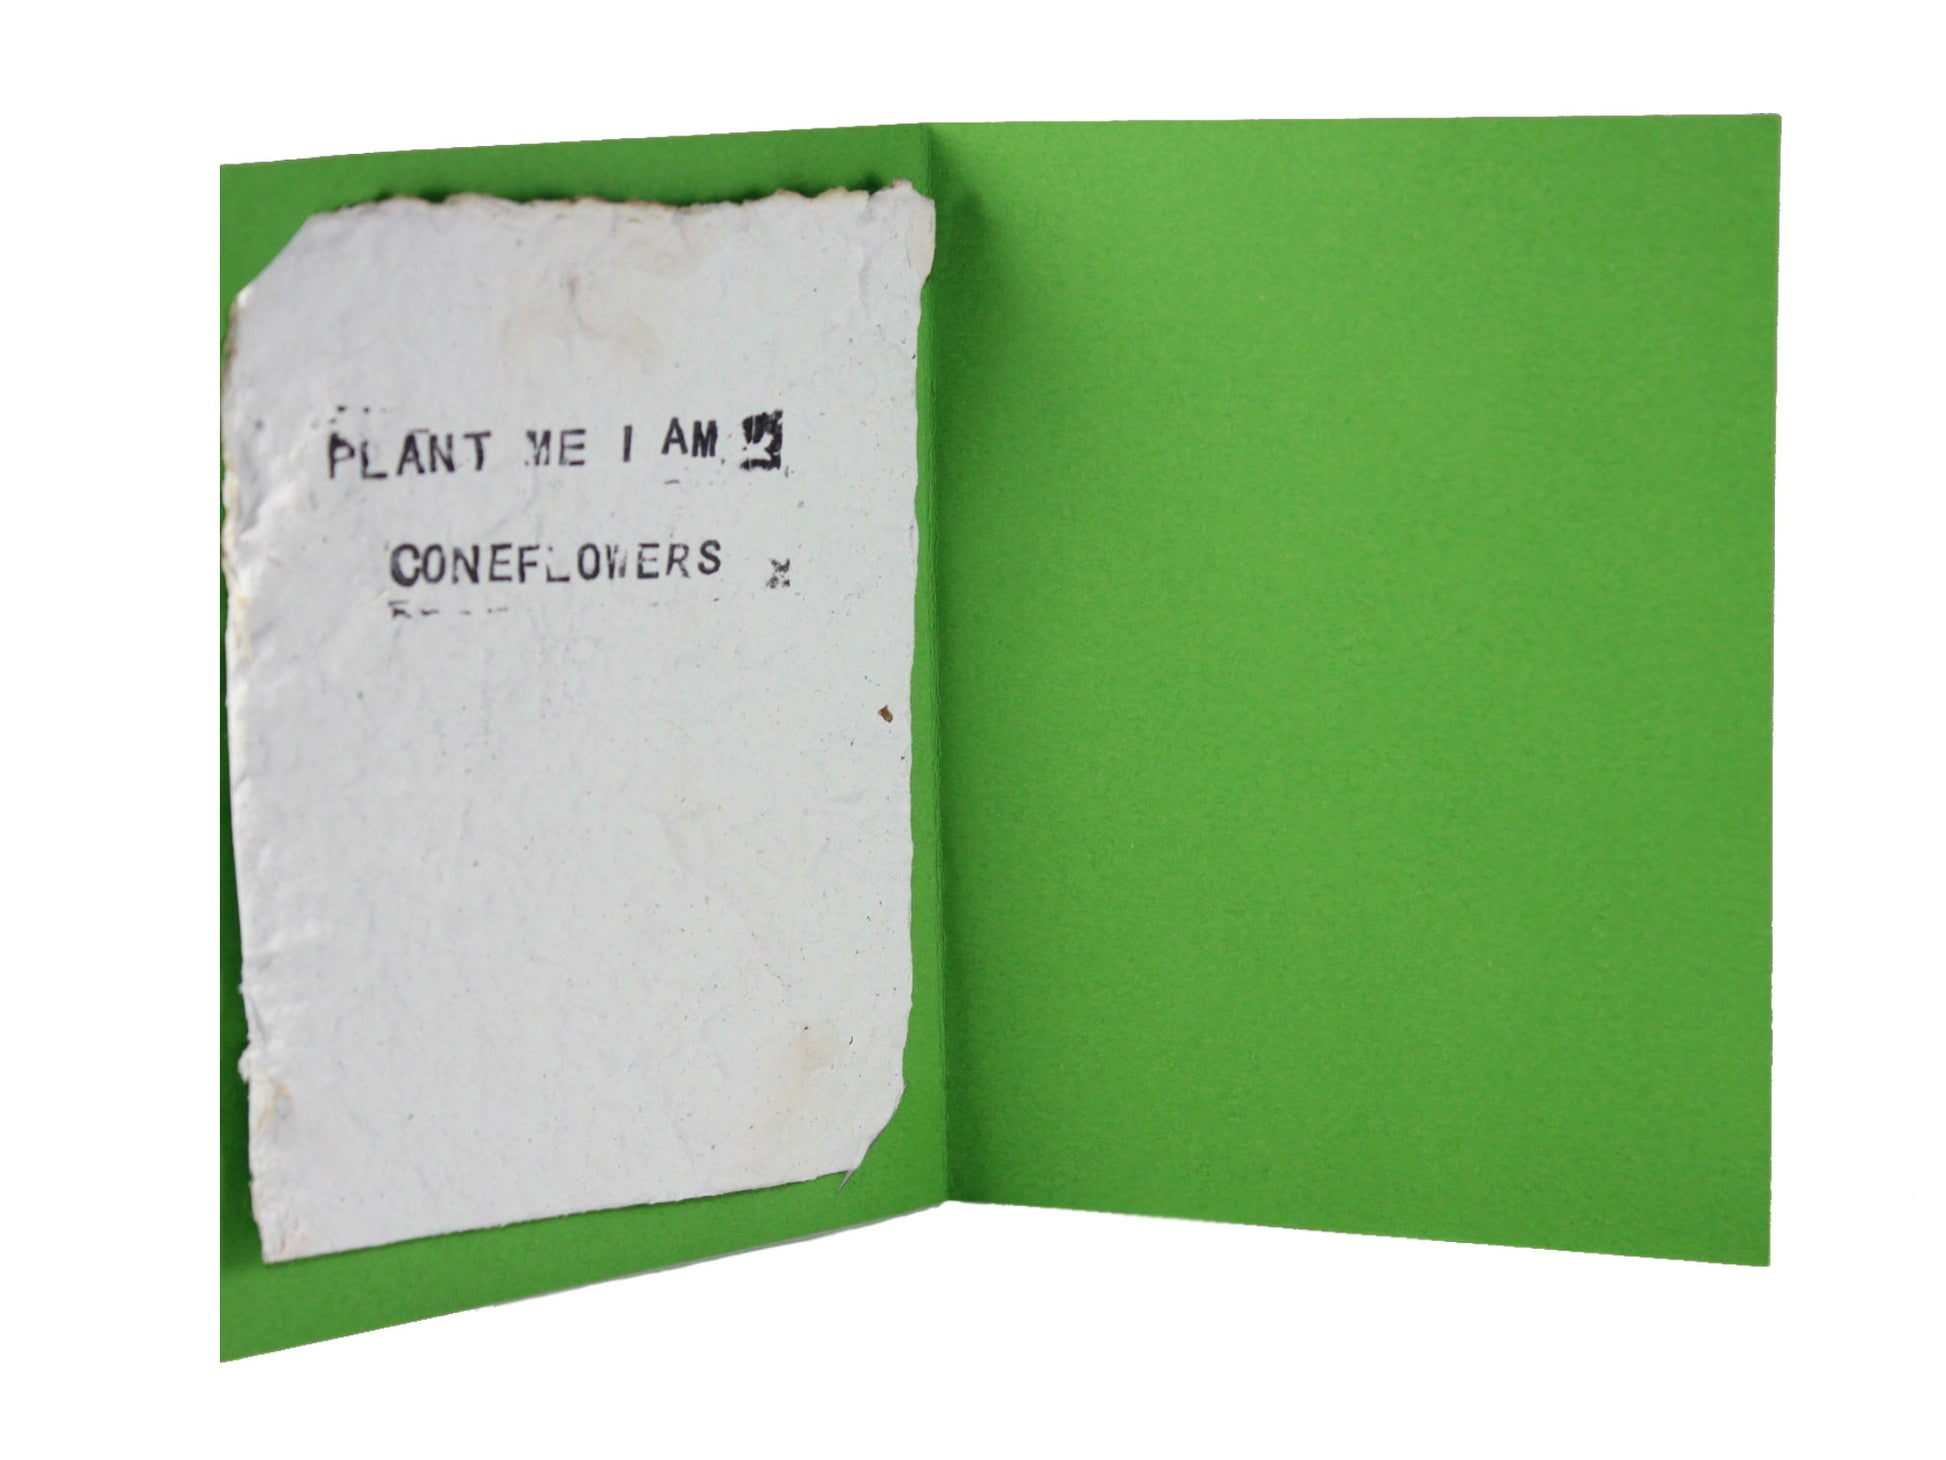 Interior of seed paper card showing seed paper that says "PLANT ME I AM CONEFLOWERS"